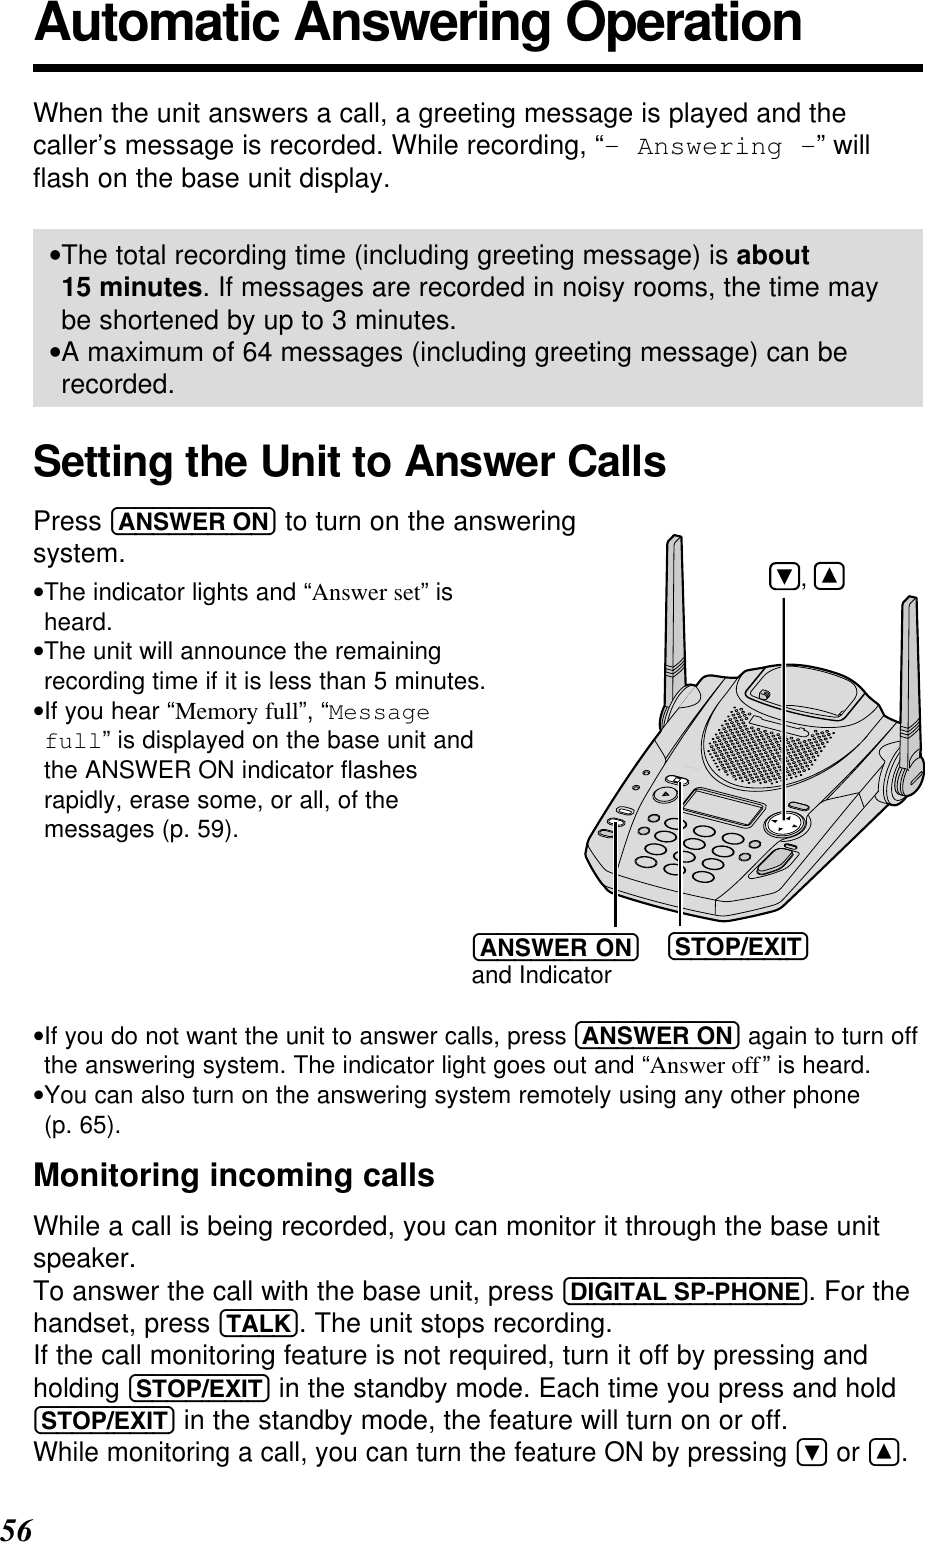 56Automatic Answering OperationWhen the unit answers a call, a greeting message is played and thecaller’s message is recorded. While recording, “- Answering -” willﬂash on the base unit display.•The total recording time (including greeting message) is about15 minutes. If messages are recorded in noisy rooms, the time maybe shortened by up to 3 minutes.•A maximum of 64 messages (including greeting message) can berecorded.Setting the Unit to Answer CallsPress (ANSWER!ON) to turn on the answering system.•The indicator lights and “Answer set” isheard.•The unit will announce the remainingrecording time if it is less than 5 minutes. •If you hear “Memory full”, “Messagefull” is displayed on the base unit andthe ANSWER ON indicator ﬂashesrapidly, erase some, or all, of themessages (p. 59).•If you do not want the unit to answer calls, press (ANSWER!ON) again to turn offthe answering system. The indicator light goes out and “Answer off” is heard.•You can also turn on the answering system remotely using any other phone(p. 65).Monitoring incoming callsWhile a call is being recorded, you can monitor it through the base unitspeaker. To answer the call with the base unit, press (DIGITAL!SP-PHONE). For thehandset, press (TALK). The unit stops recording.If the call monitoring feature is not required, turn it off by pressing andholding (STOP/EXIT) in the standby mode. Each time you press and hold(STOP/EXIT) in the standby mode, the feature will turn on or off.While monitoring a call, you can turn the feature ON by pressing Öor Ñ.(STOP/EXIT)(ANSWERÒON)and Indicator     ,       